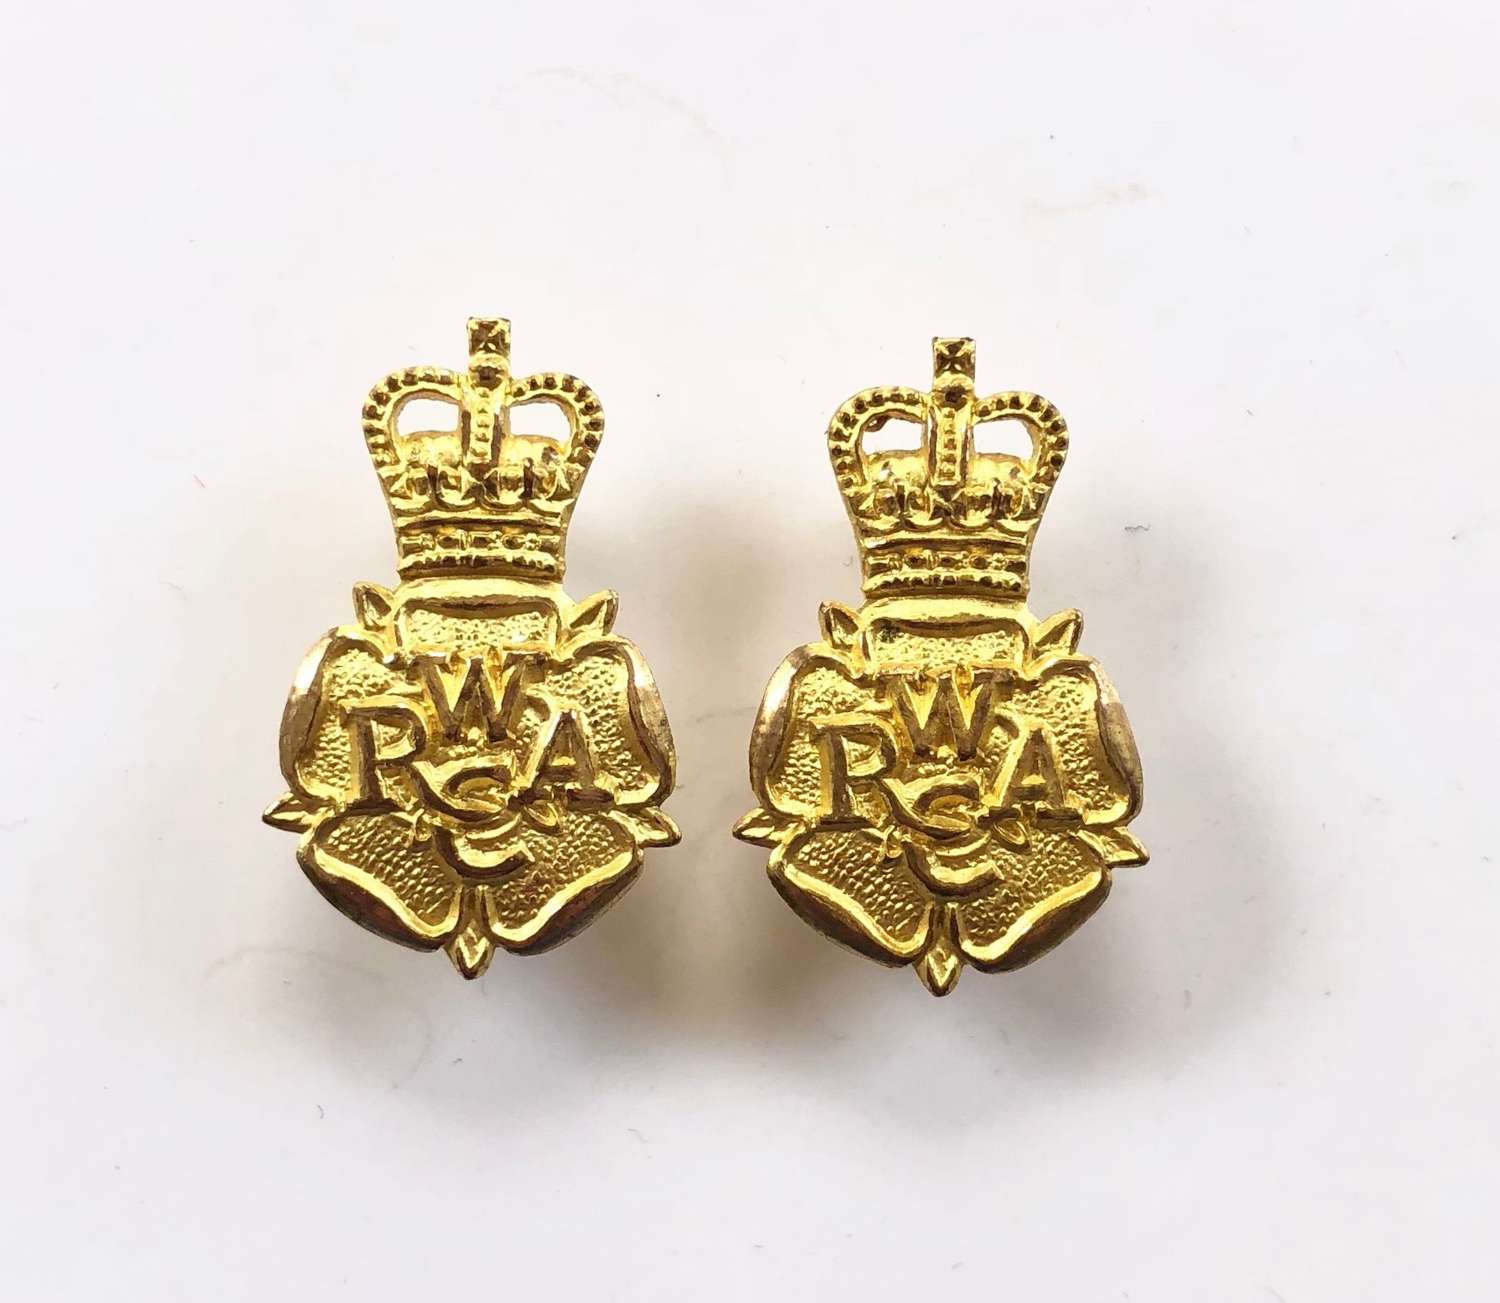 Women's Royal Army Corps  Officers Collar Badges